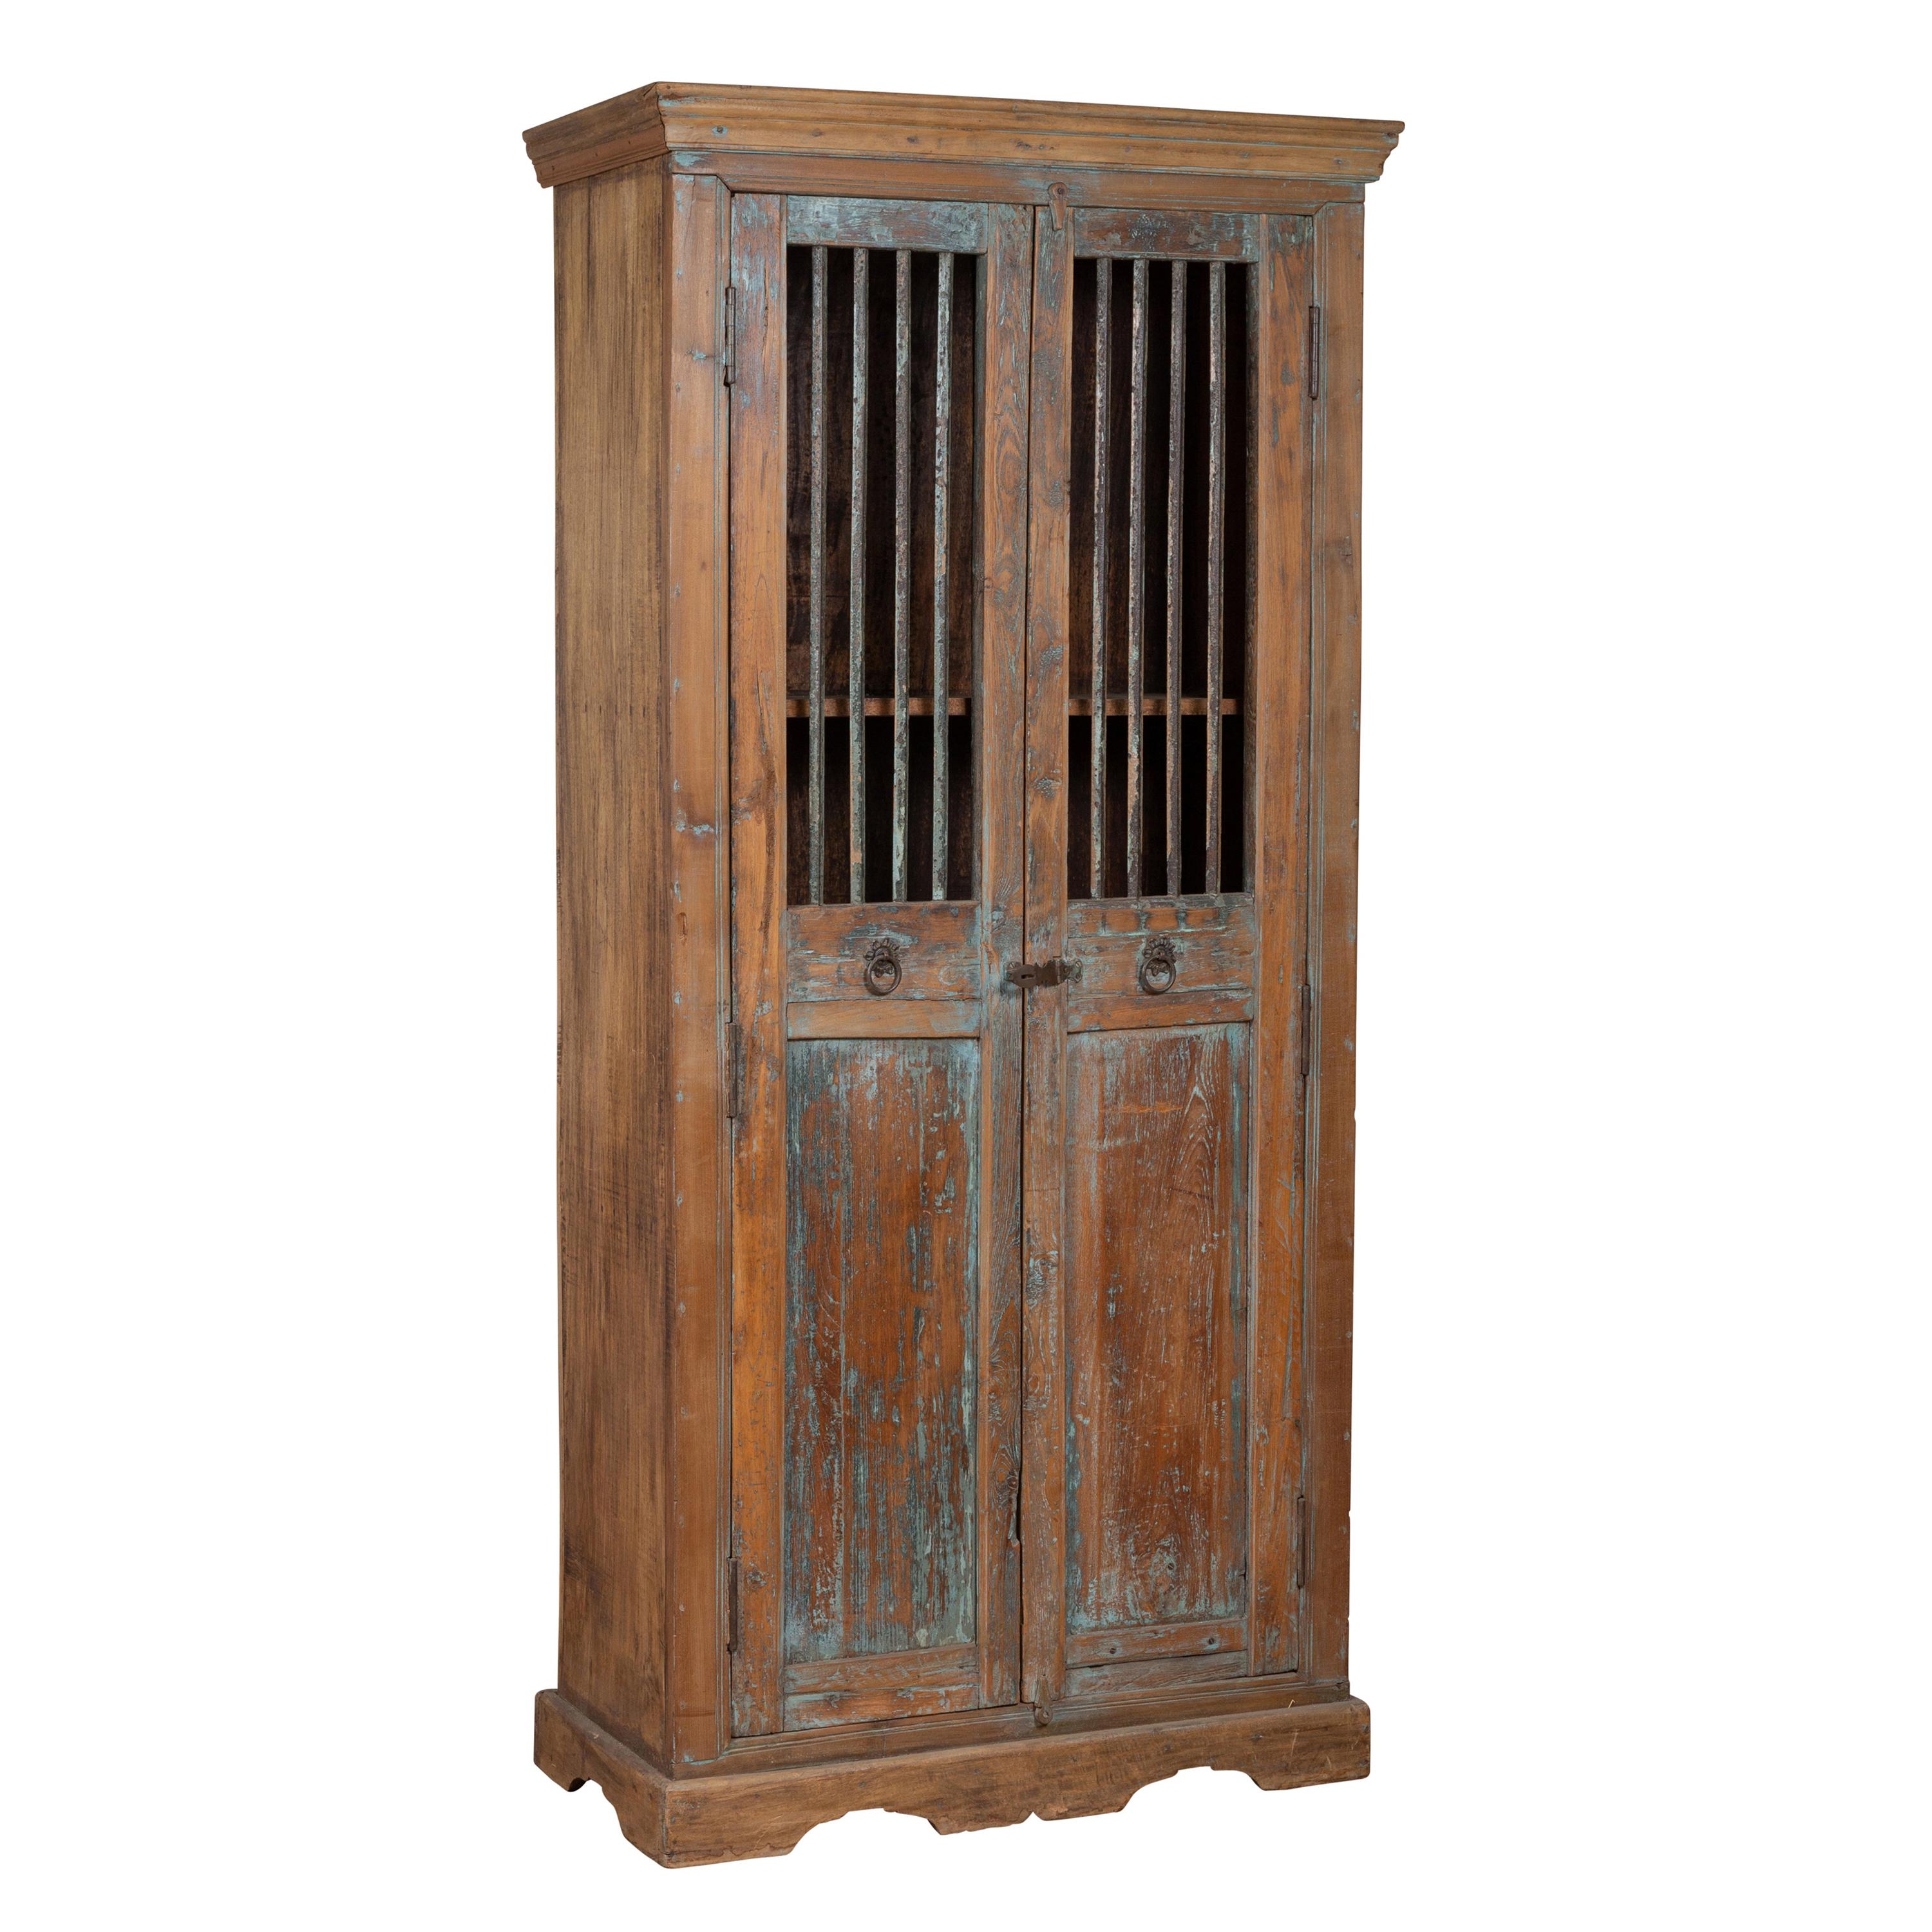 Early 20th Century Indian Rustic Wooden Kitchen Cabinet with Distressed Finish For Sale